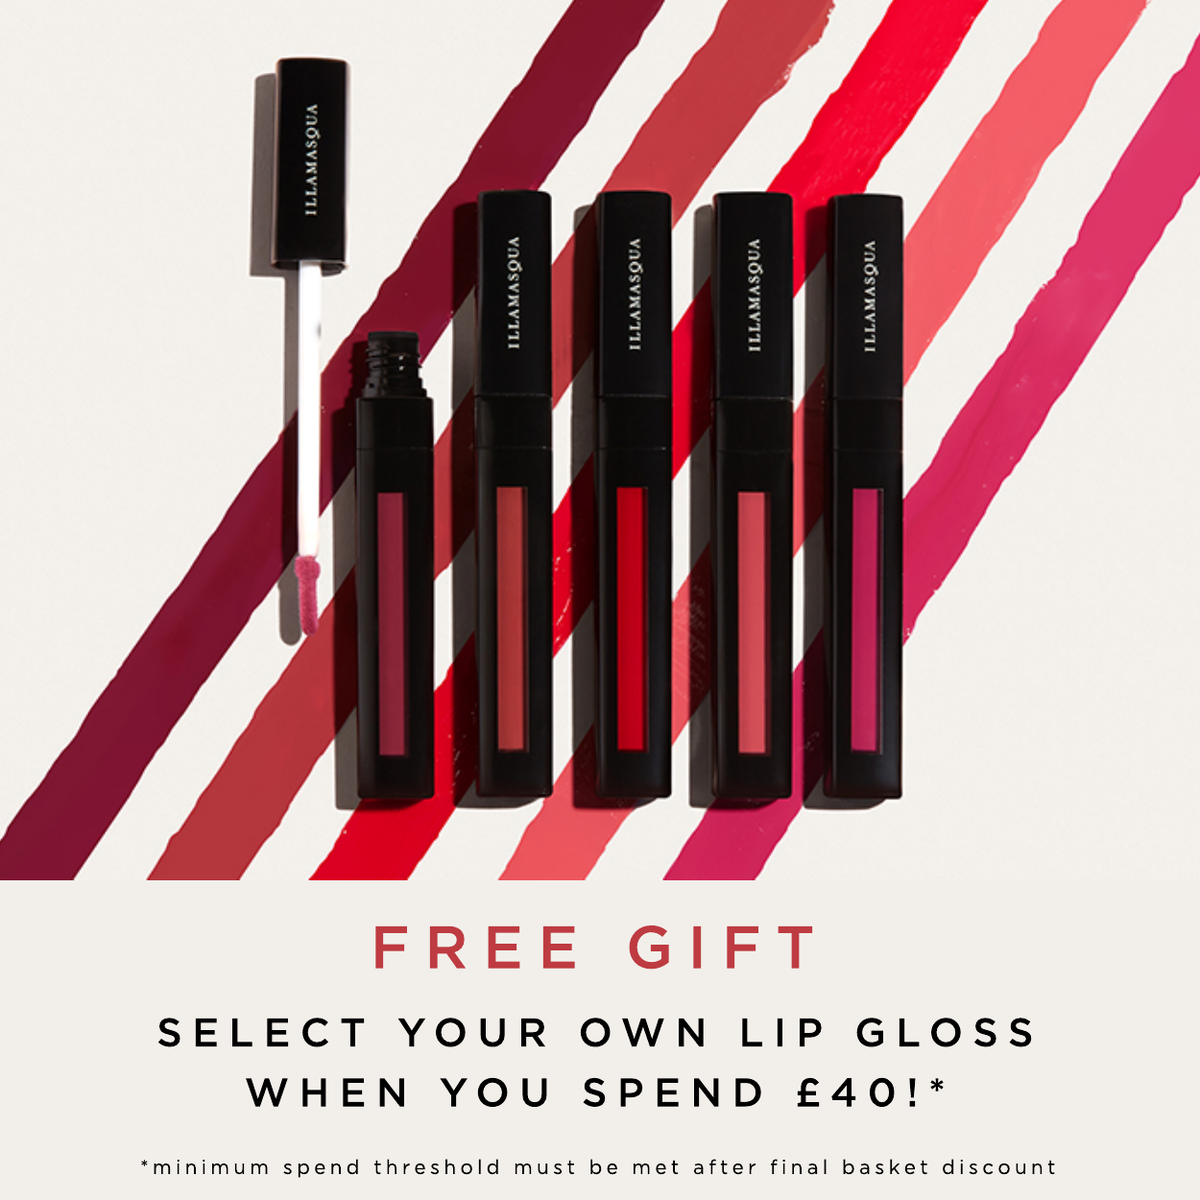 Free Lip Gloss when you spend £40